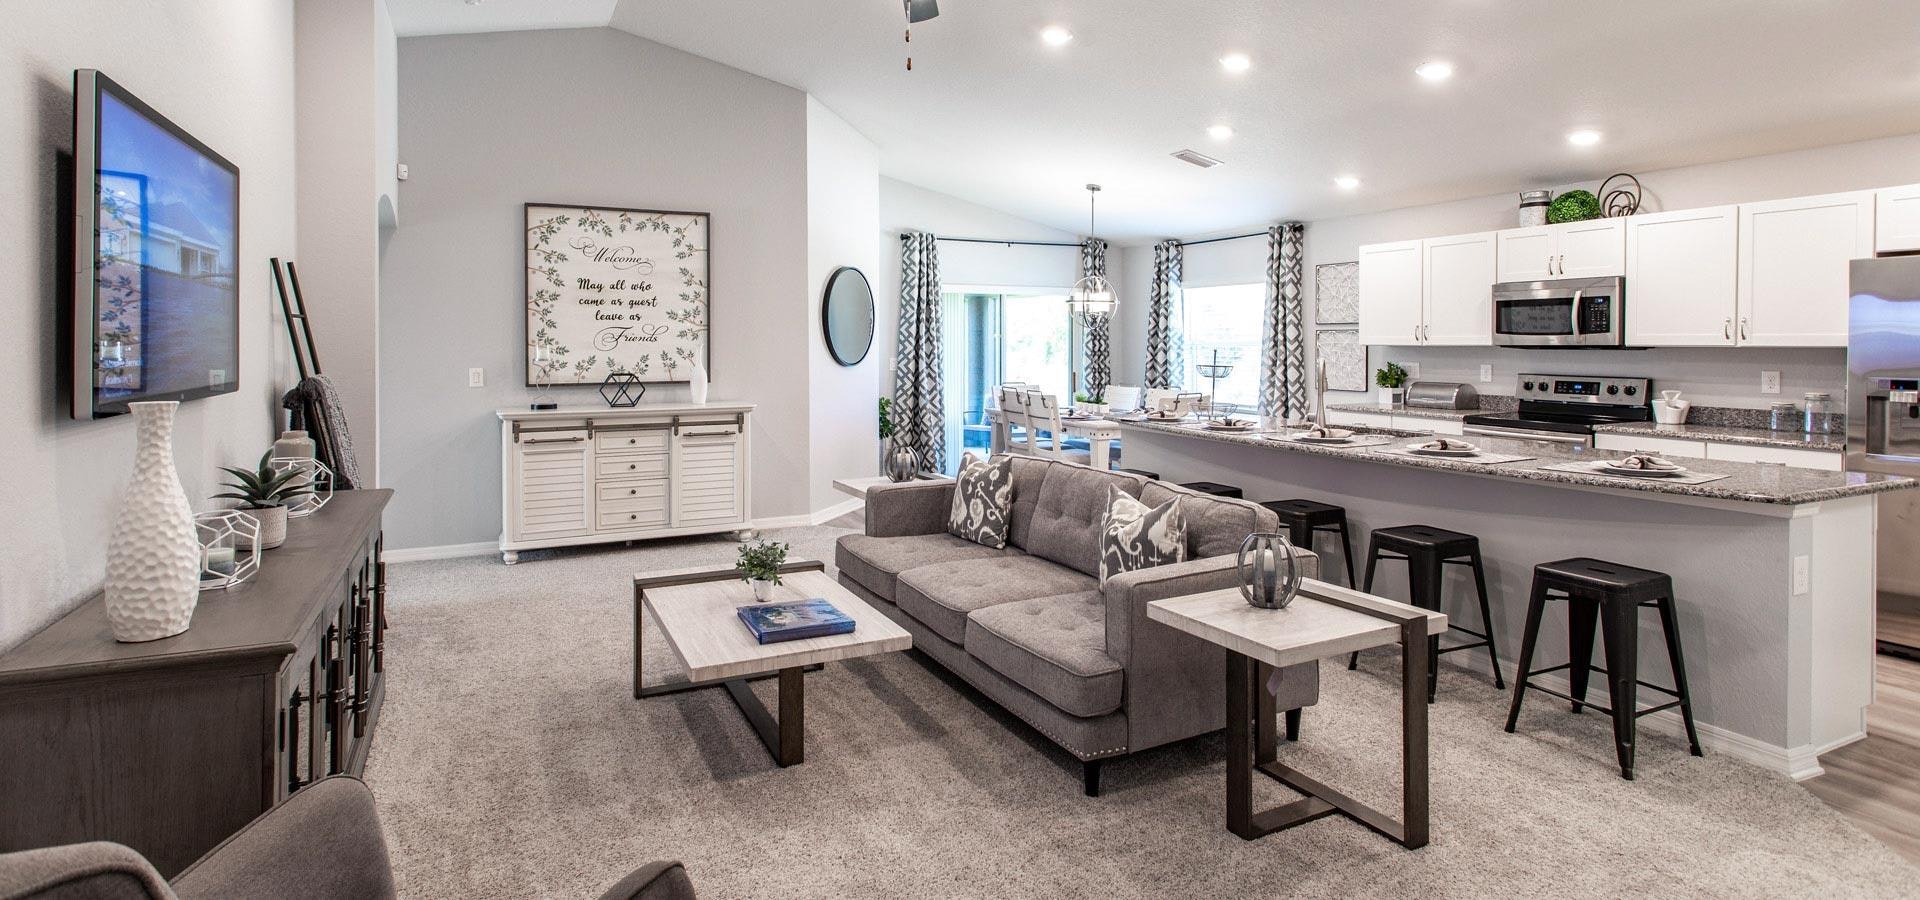 Living area of a new construction home in Parrish, FL by Highland Homes